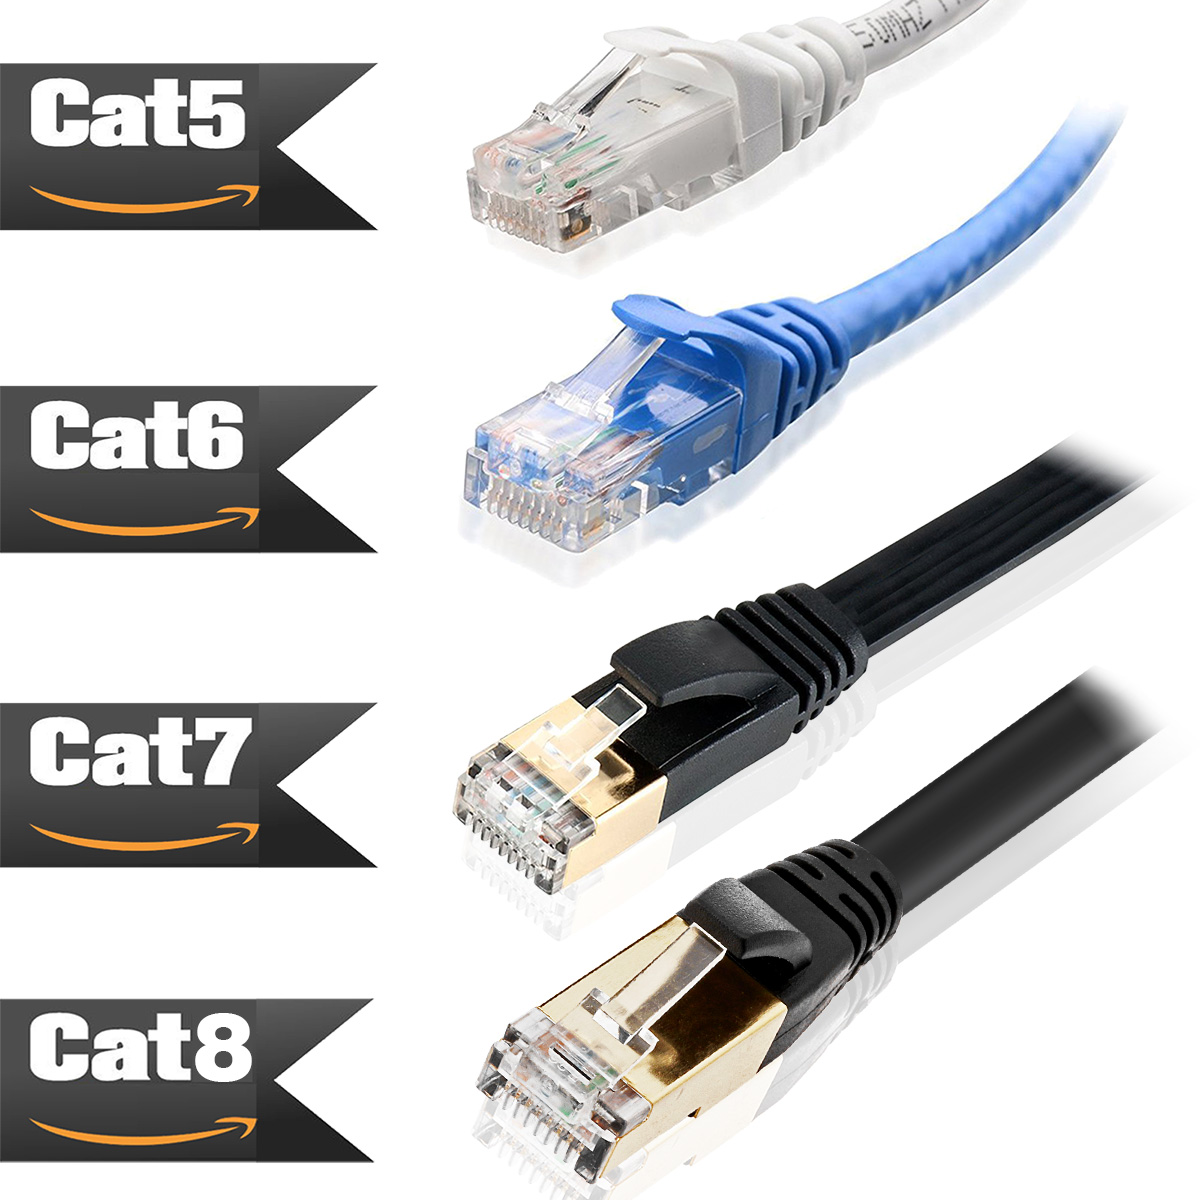 Ethernet Cable Cat 7 Vs 6